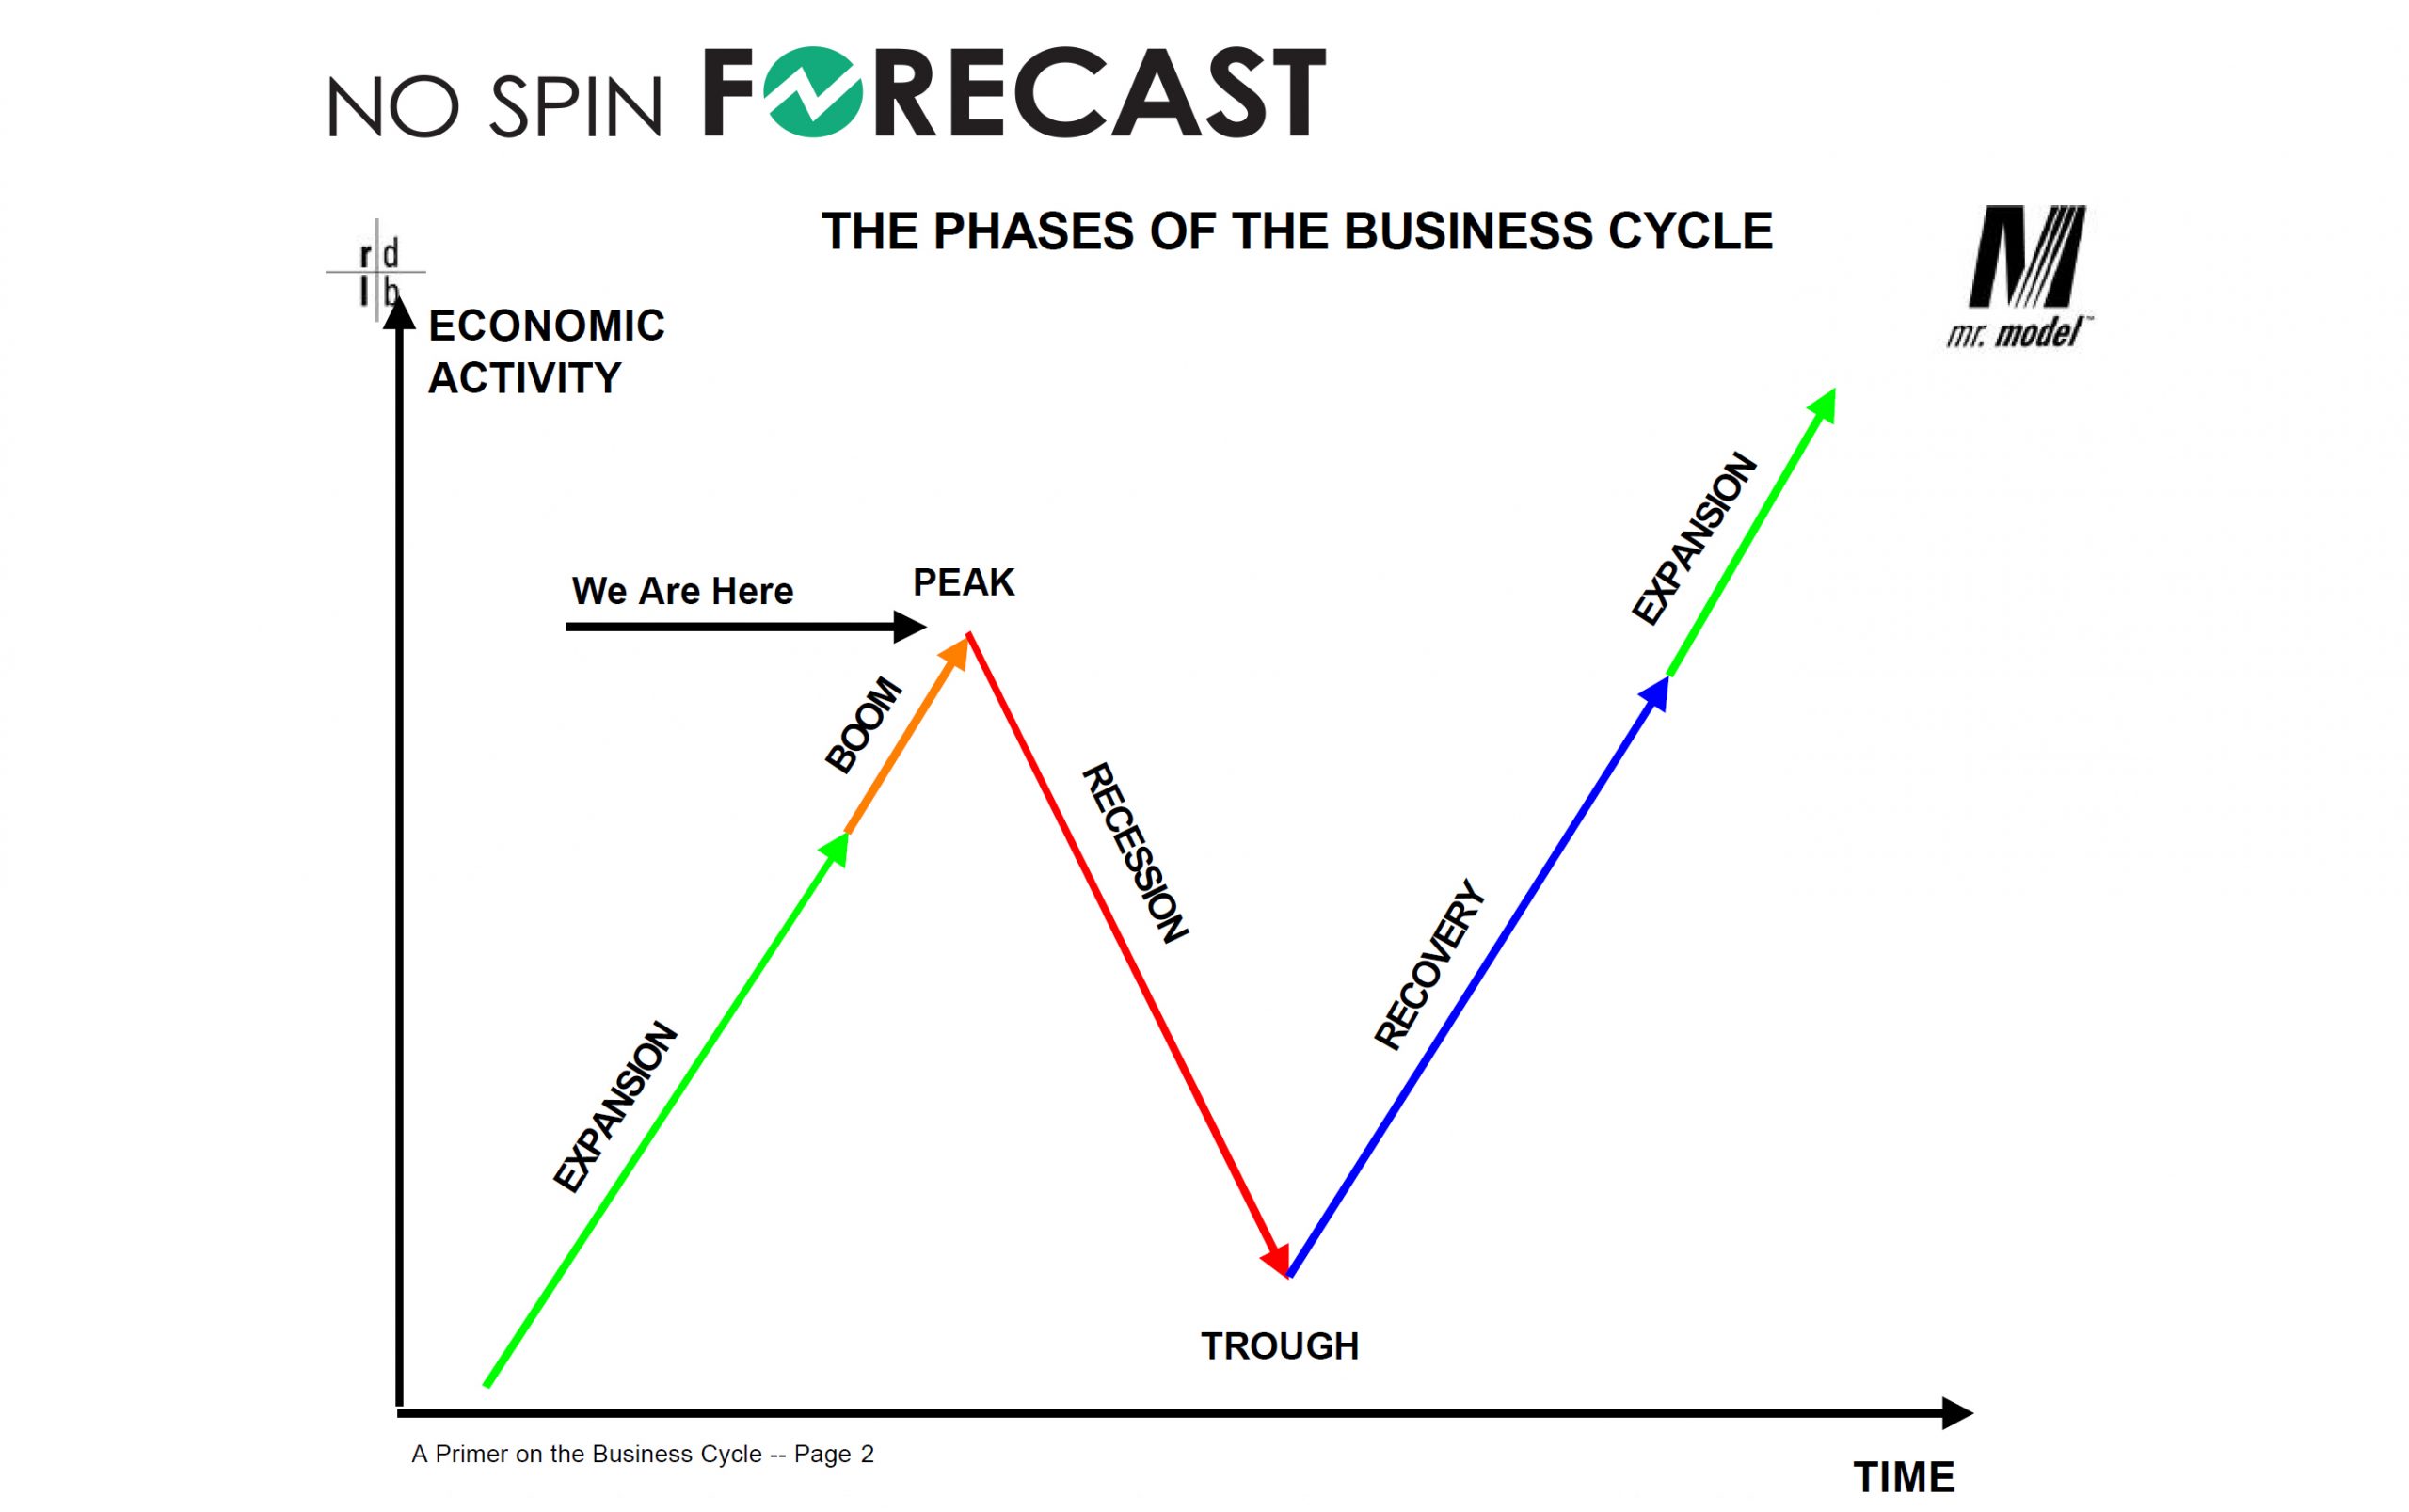 Download a FREE Primer on the Business Cycle